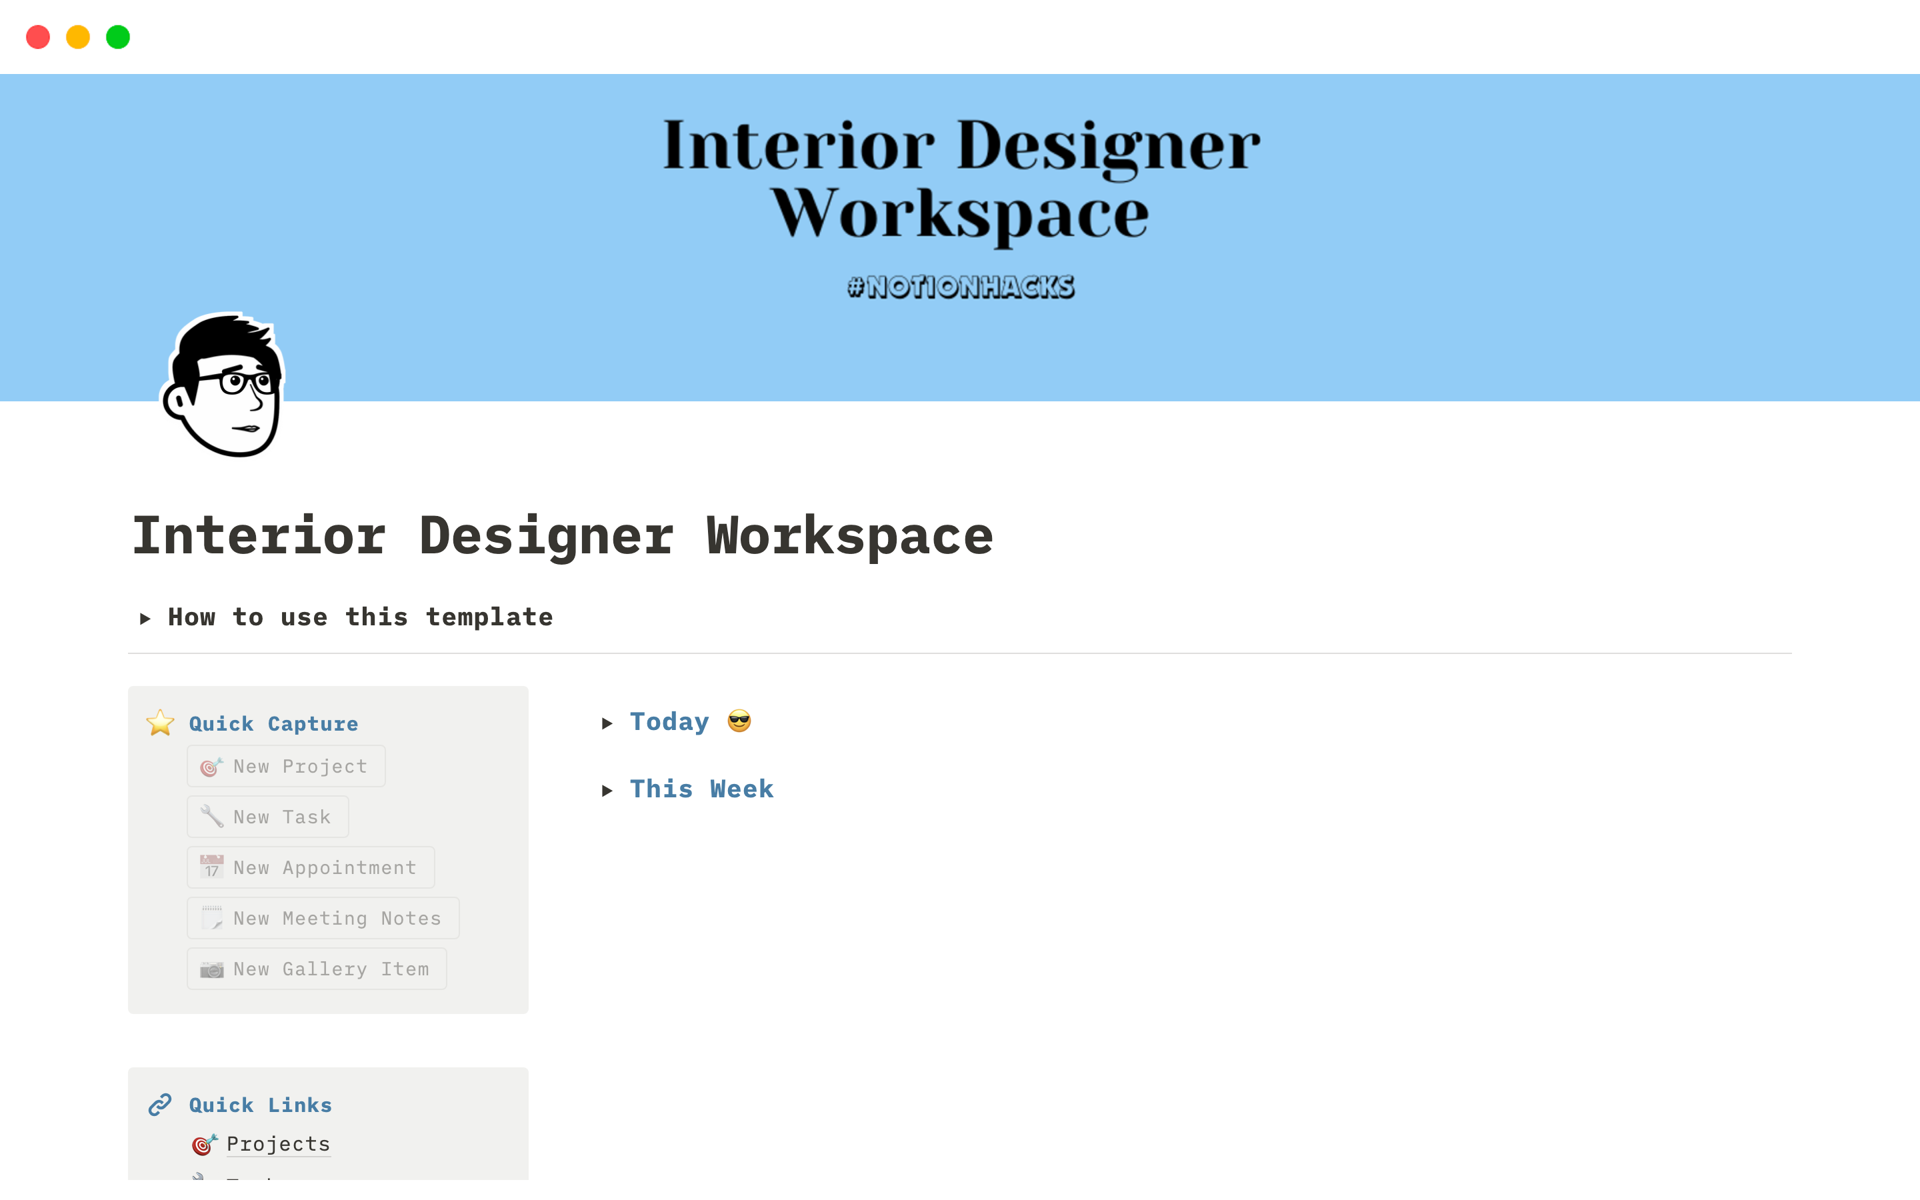 A lightweight Notion template for home interior designers to manage various aspects of their workflows.